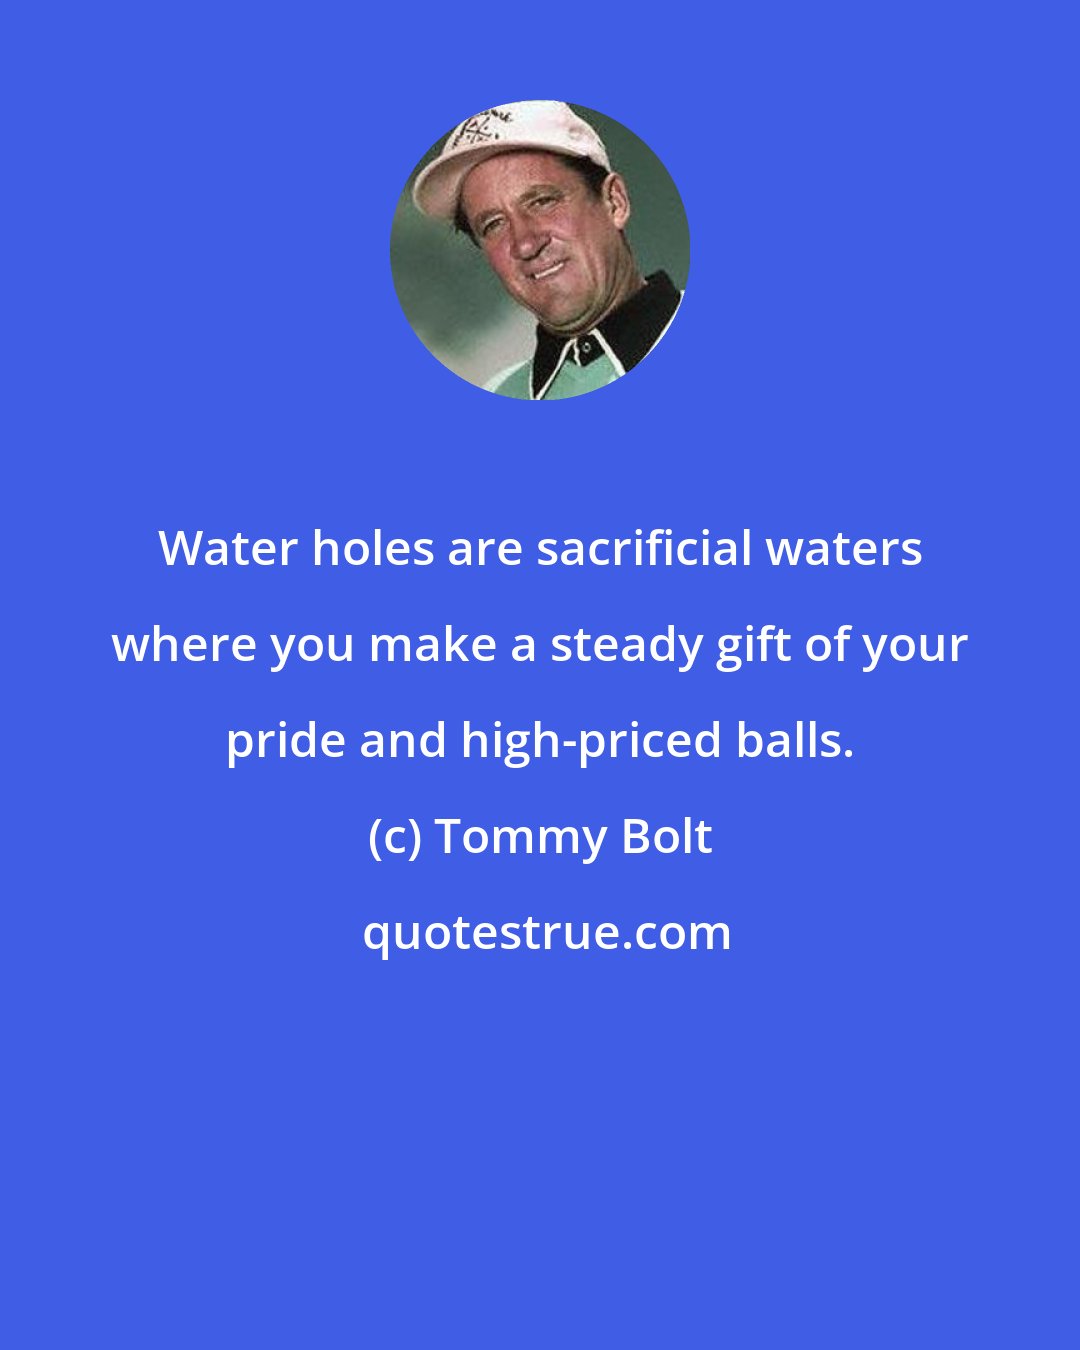 Tommy Bolt: Water holes are sacrificial waters where you make a steady gift of your pride and high-priced balls.